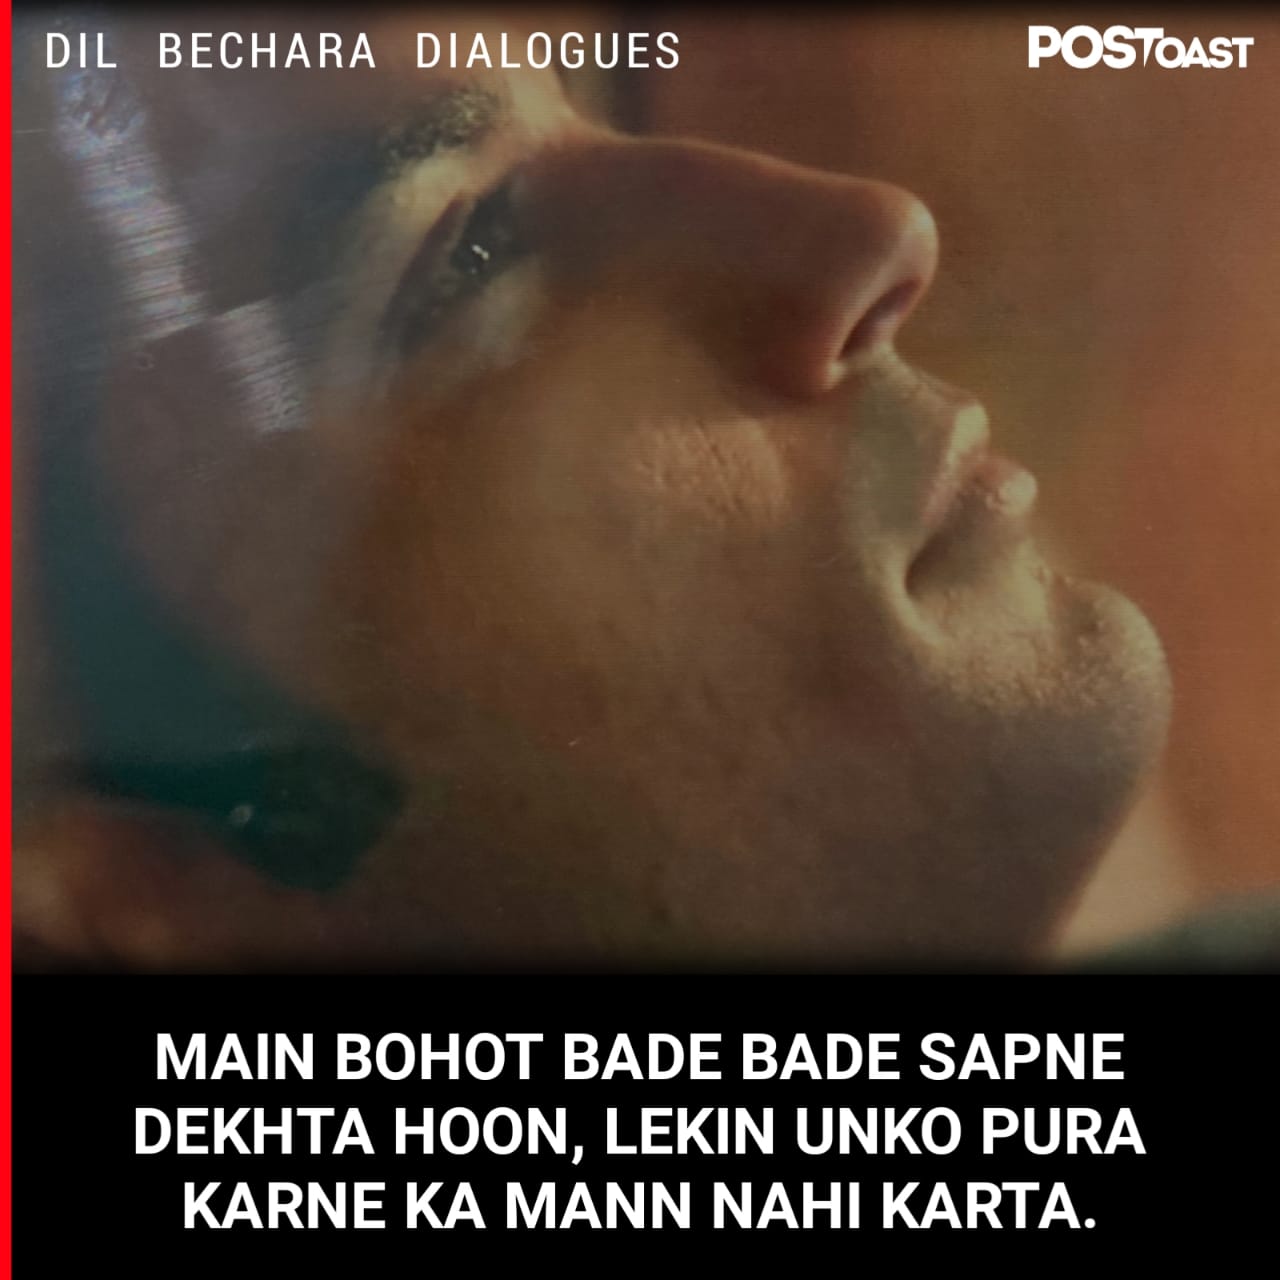 17 Dialogues From Dil Bechara That Will Remain In Our Memories Forever